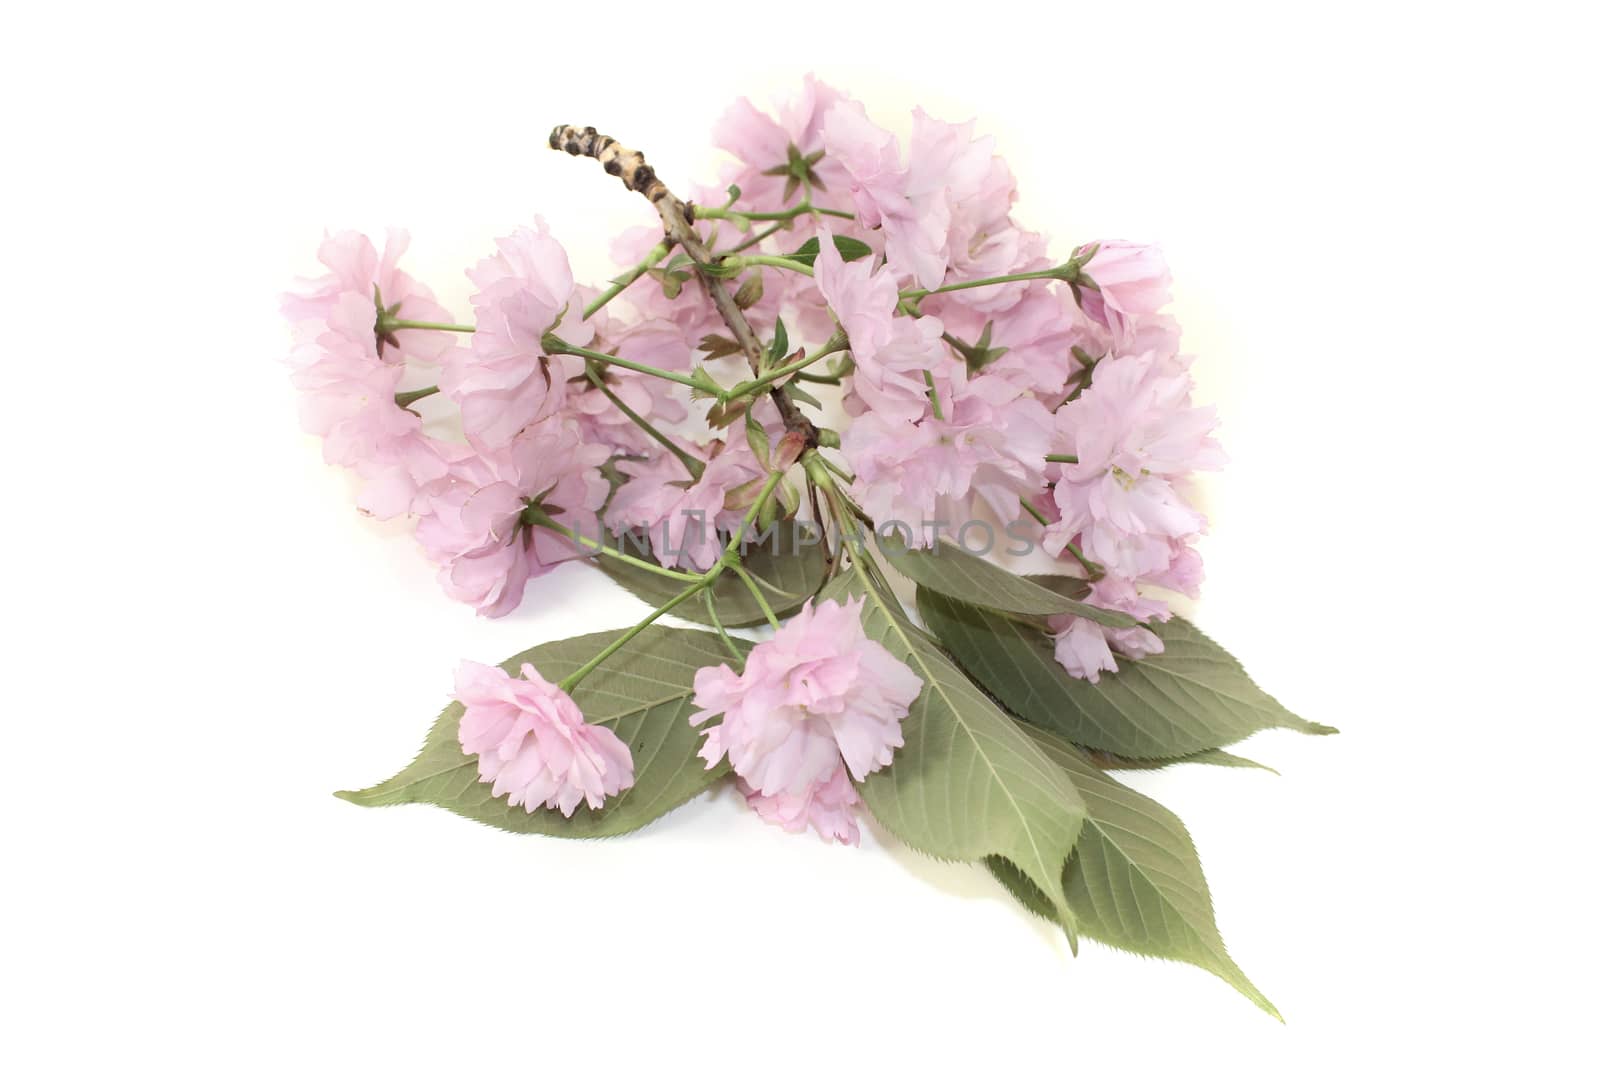 East Asian cherry blossoms on a light background